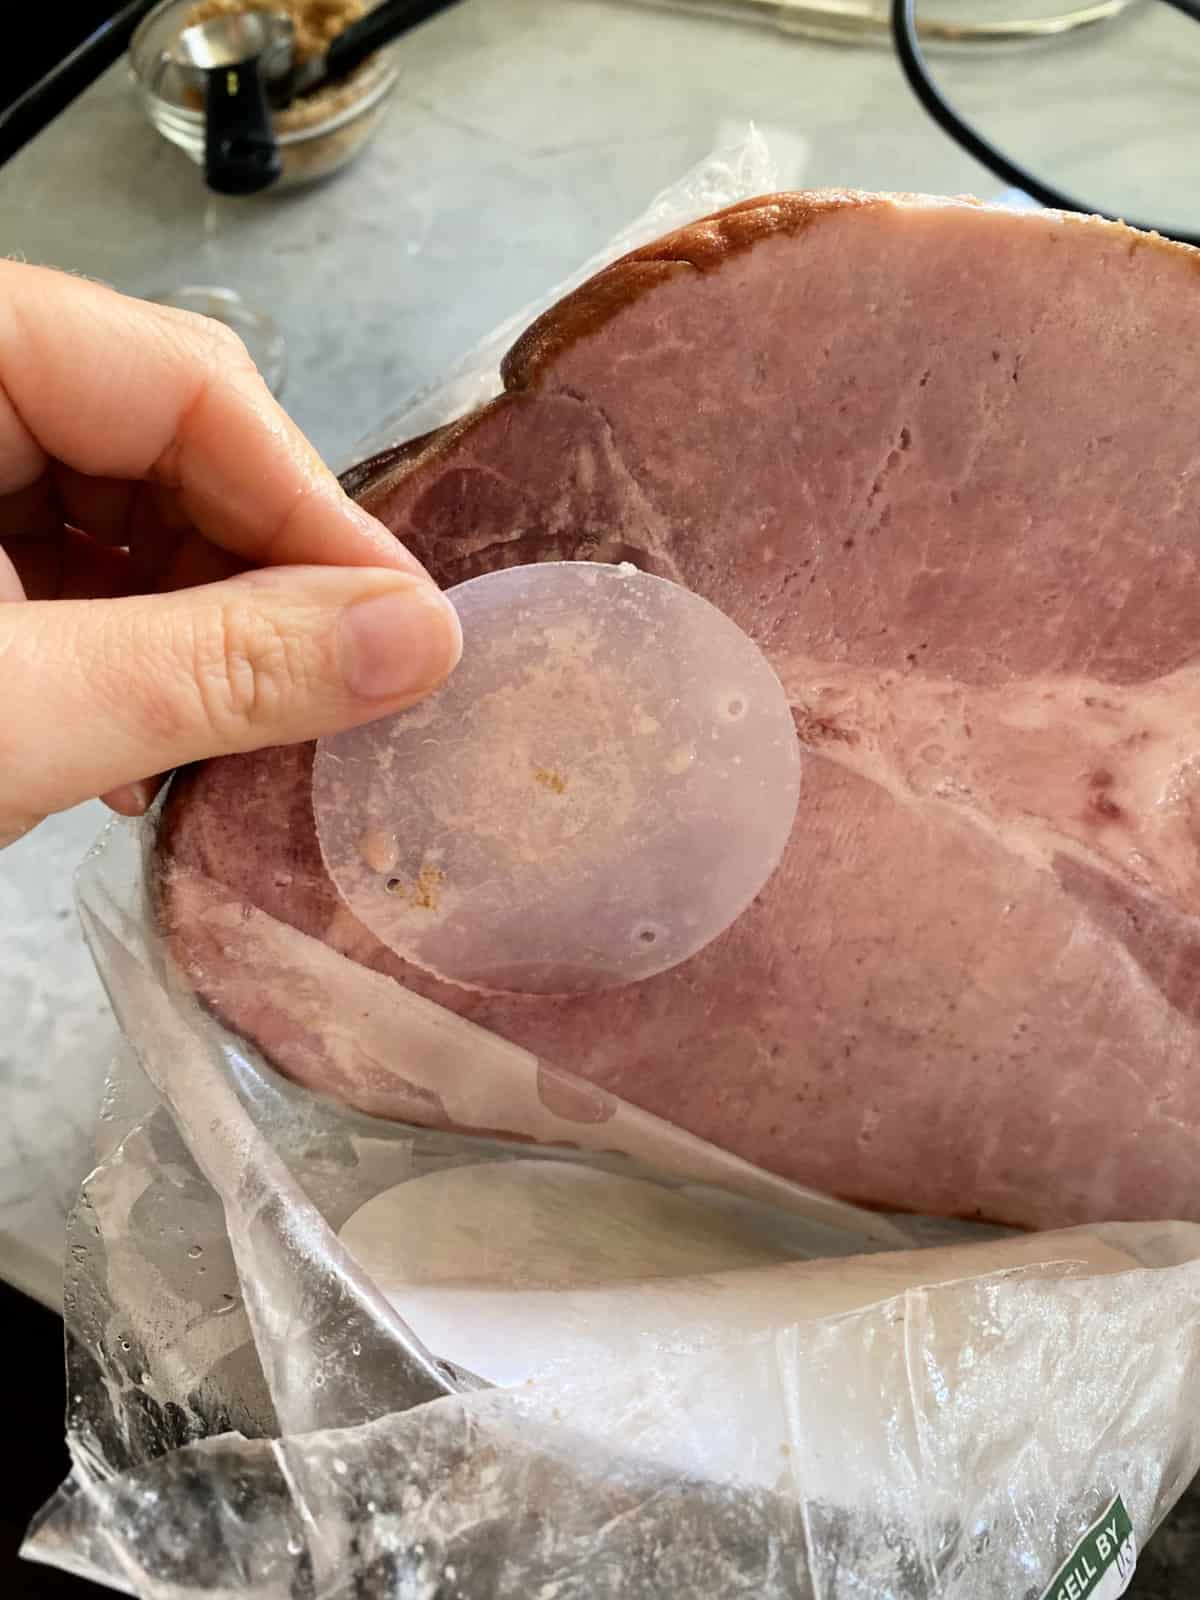 Plastic clear disc being removed from the core of the ham.